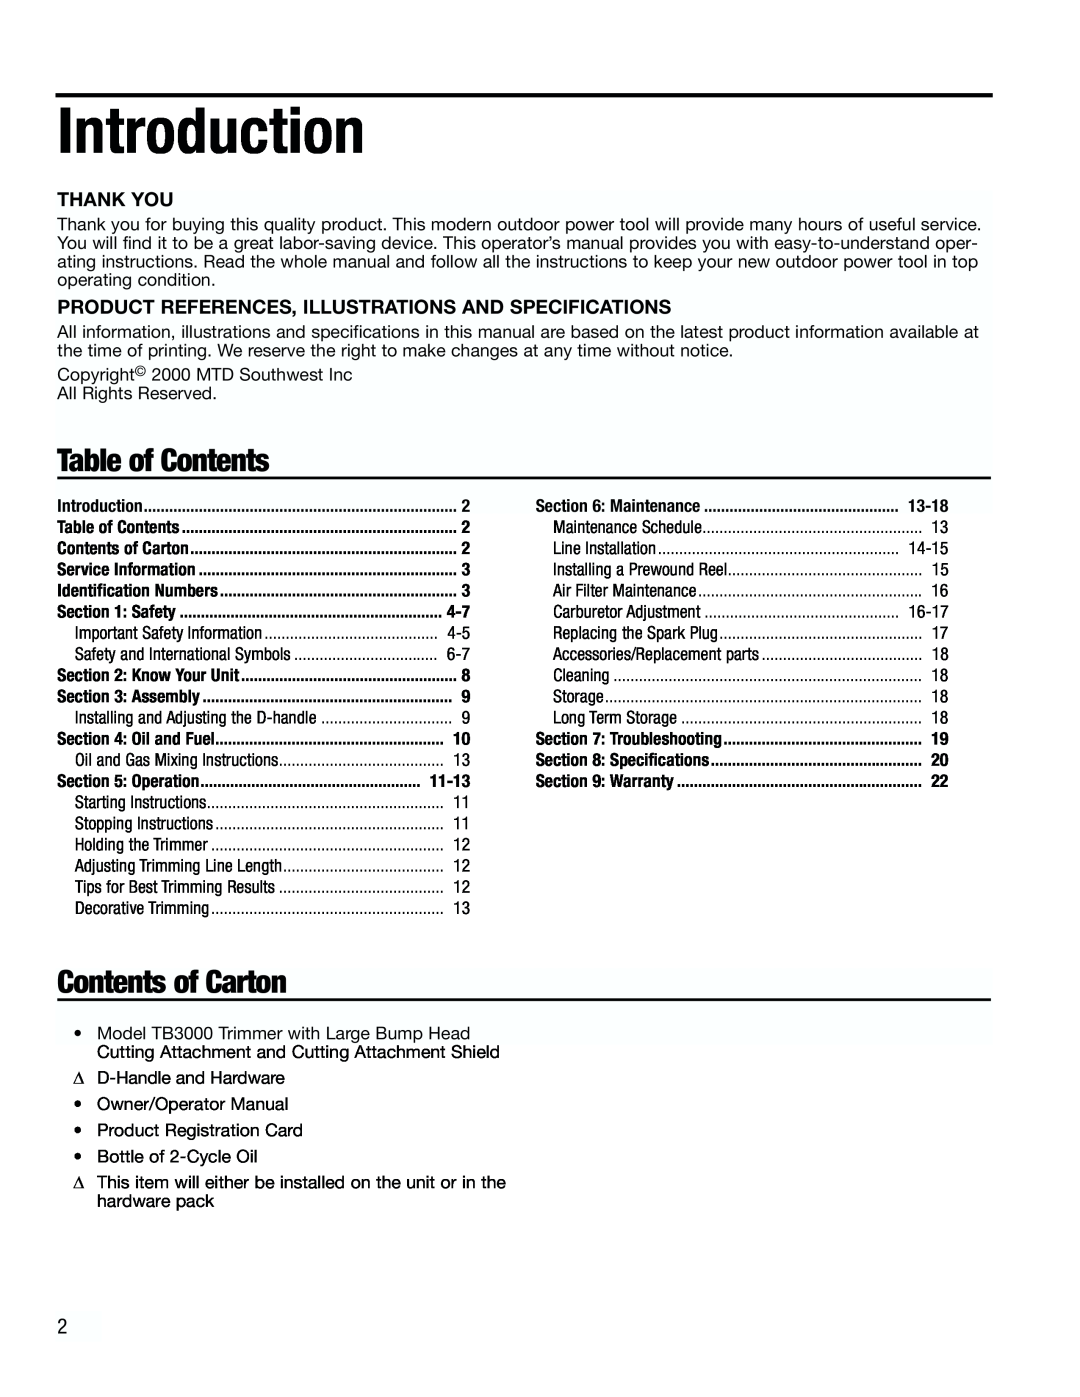 Troy-Bilt TB3000 manual Introduction, Table of Contents, Contents of Carton 